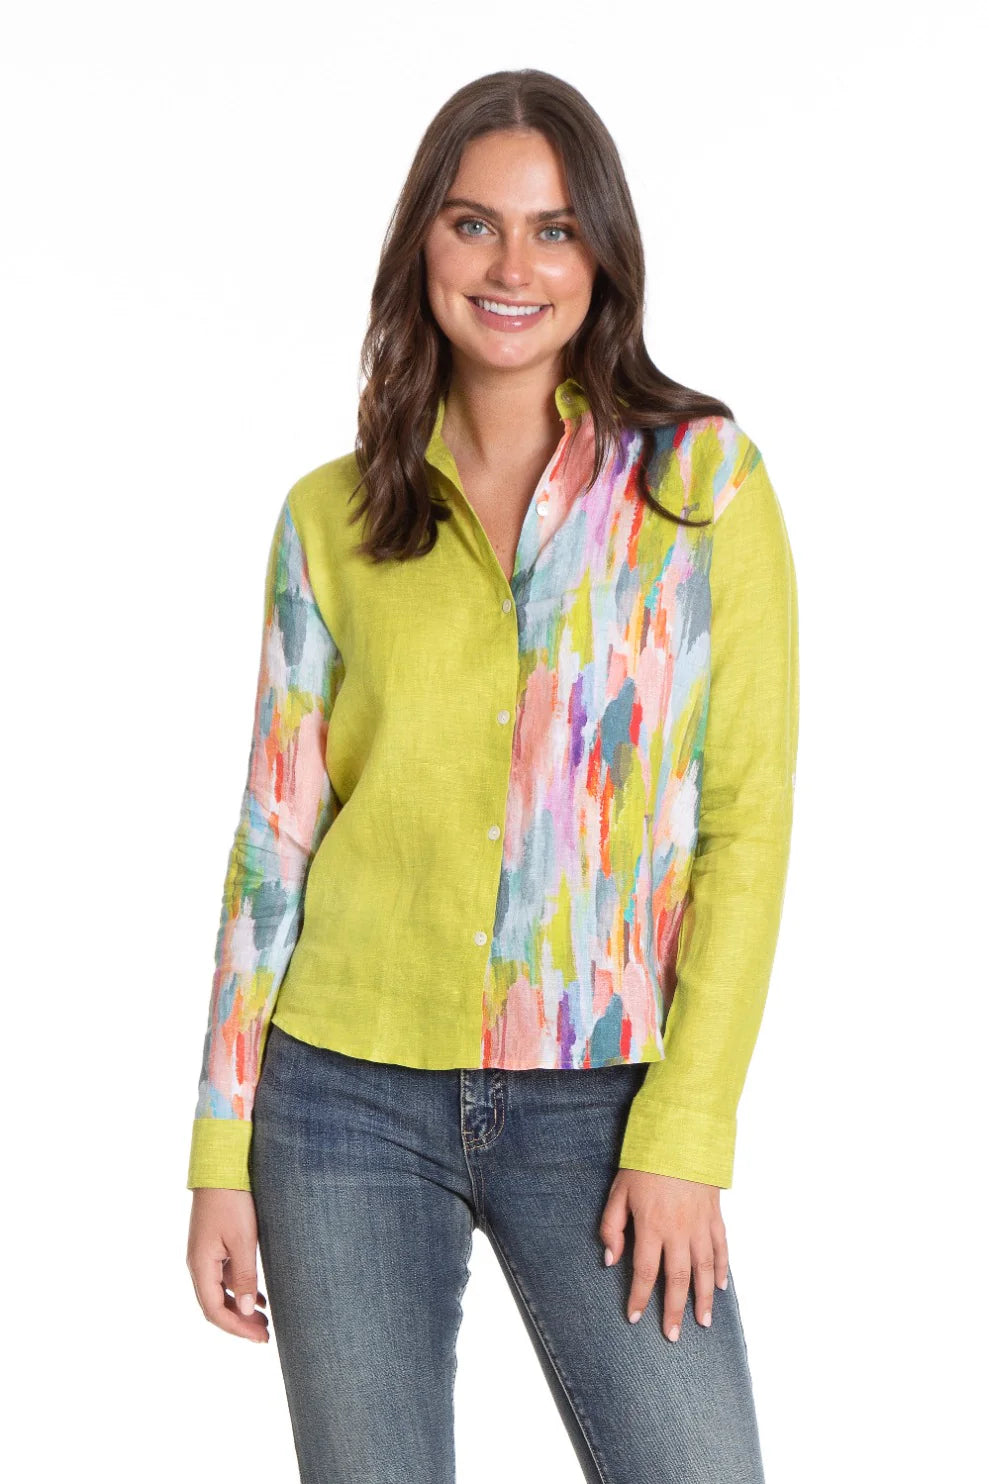 Colorful Abstract Mixed Media Print - Button-up with Roll up Tab Sleeve/Mix Media